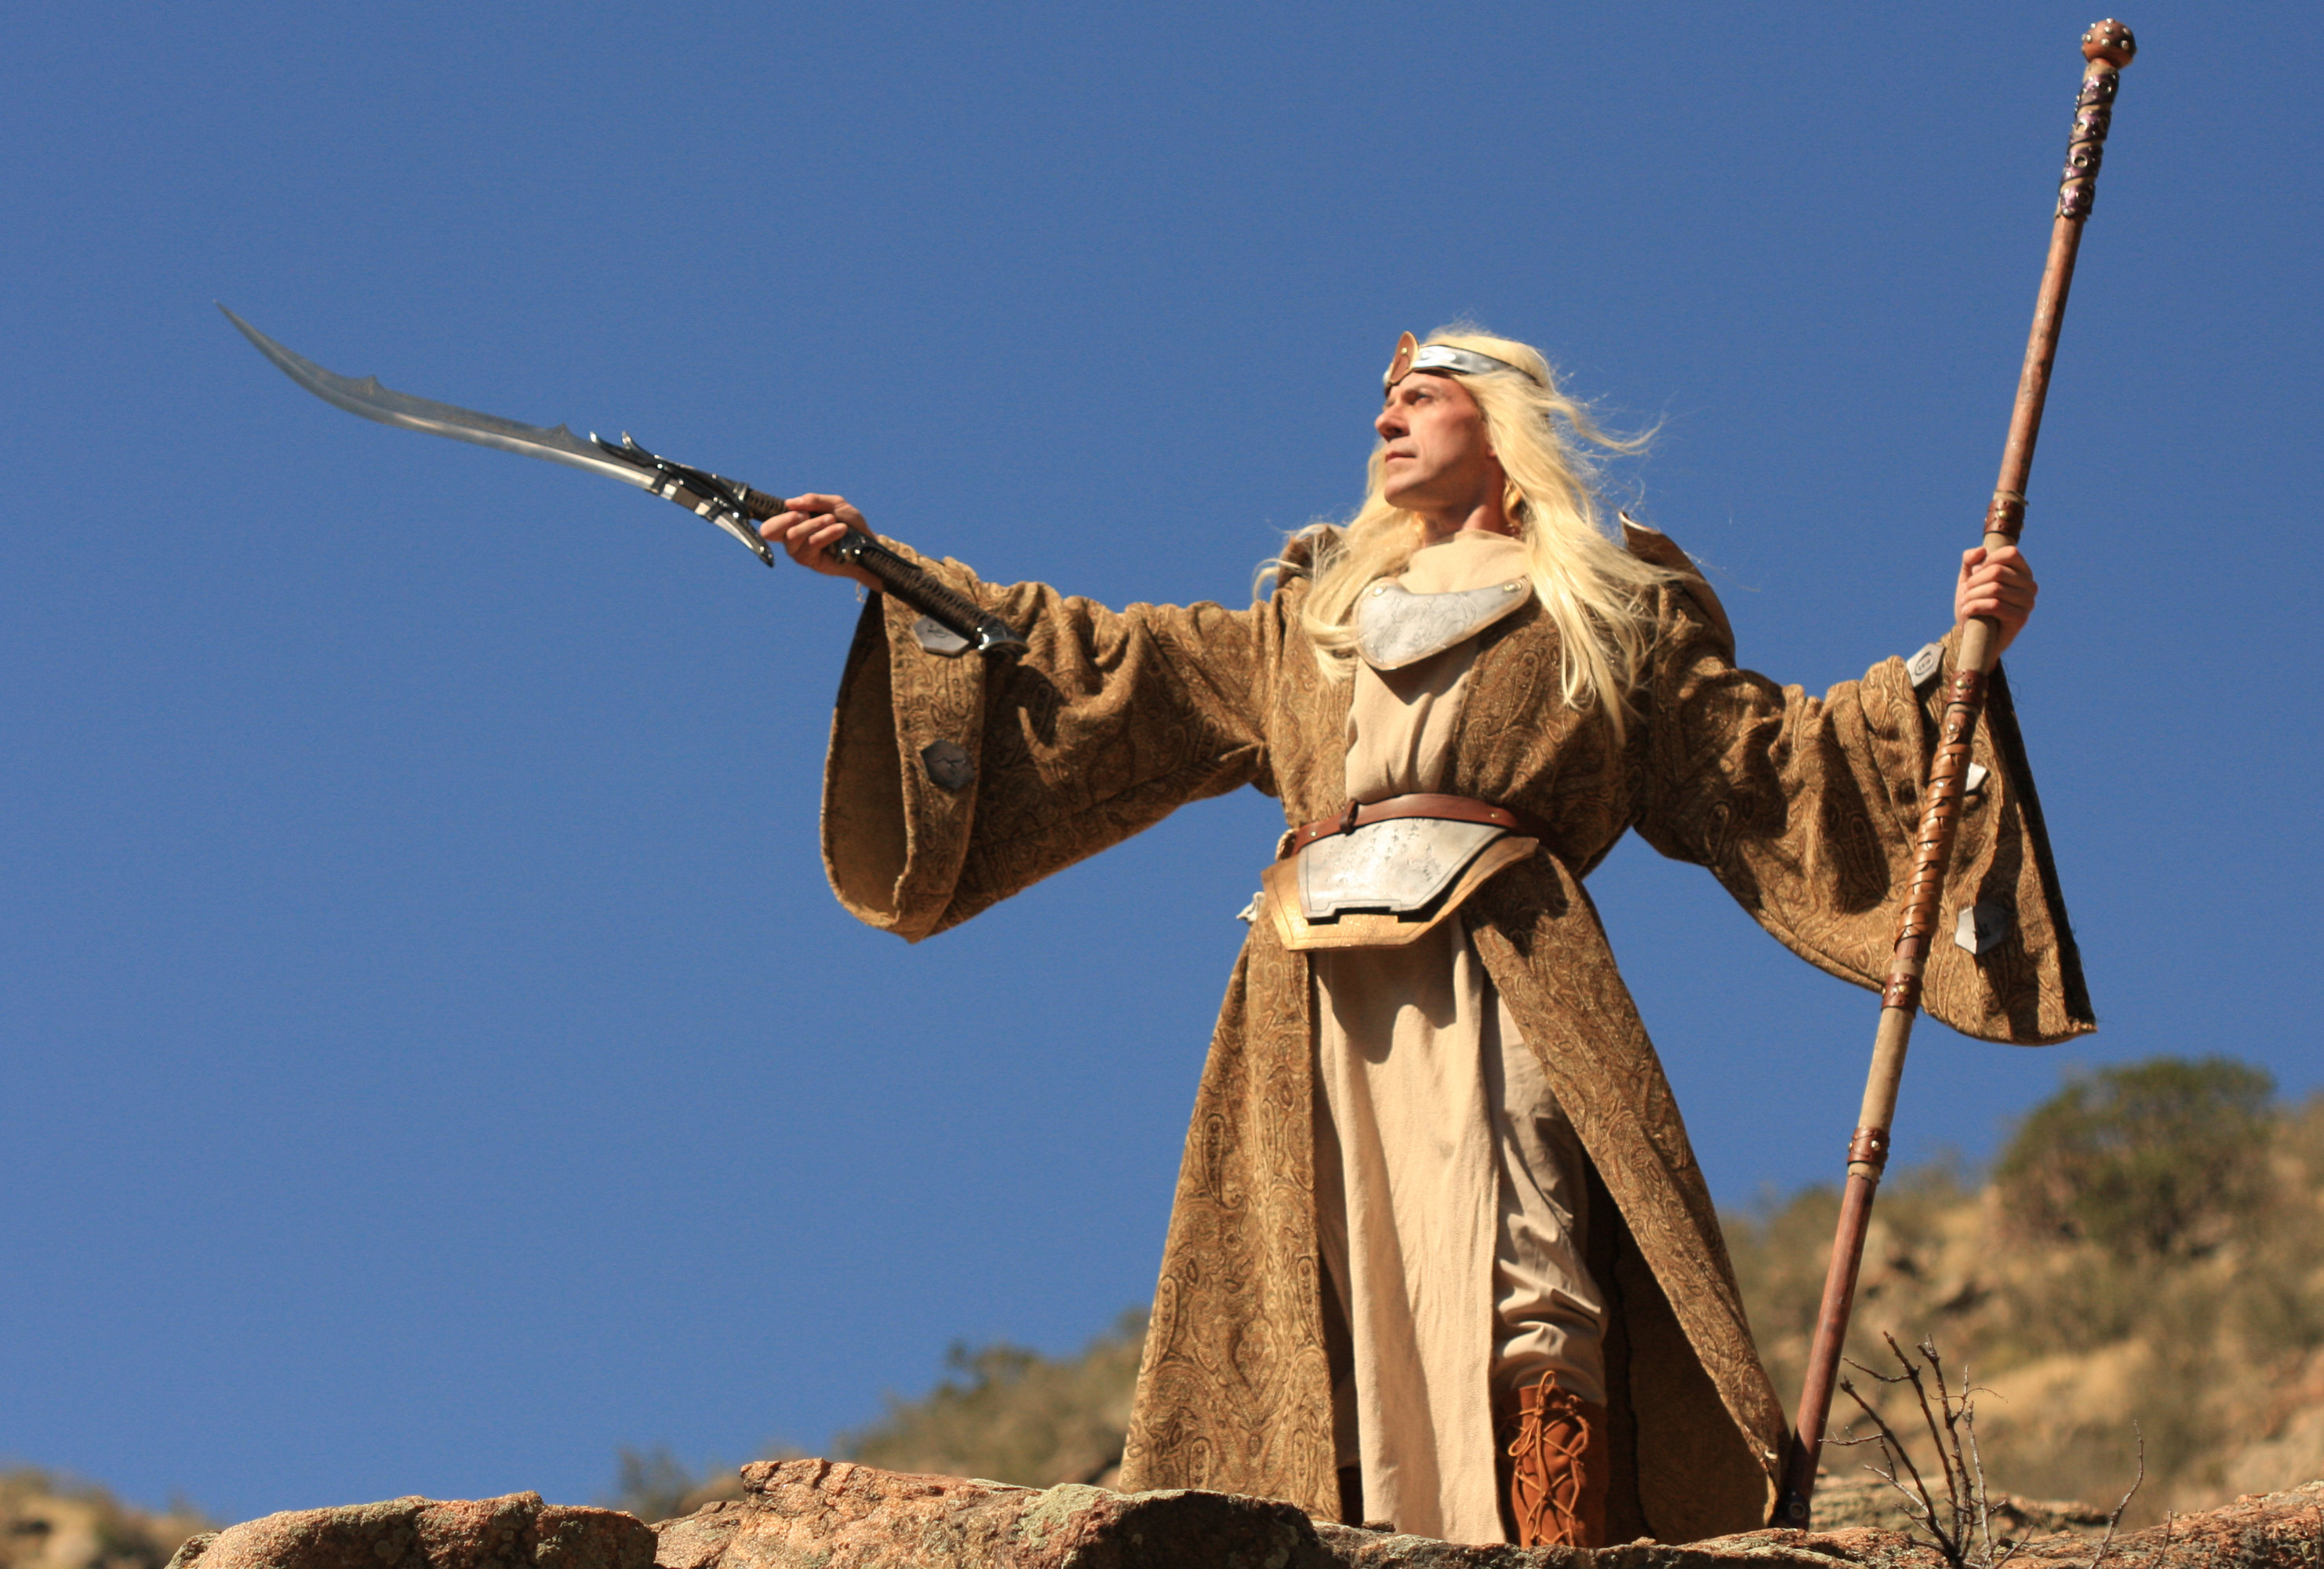 Trygve Lode in Gathering of Heroes: Legend of the Seven Swords (2015)